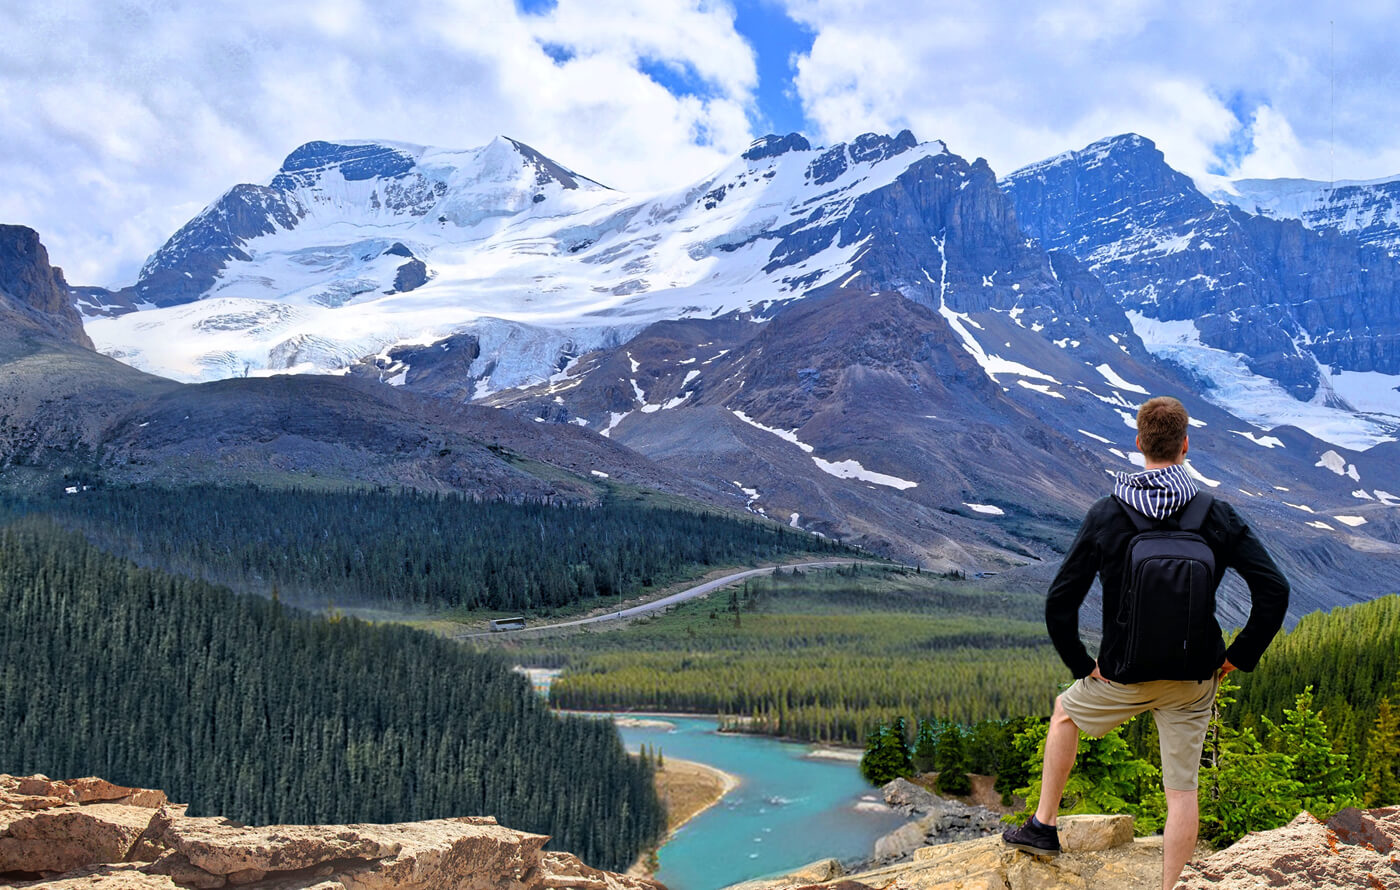 Top 10 best places to visit in Canada | TravelBox - Multi-User Travel Blog